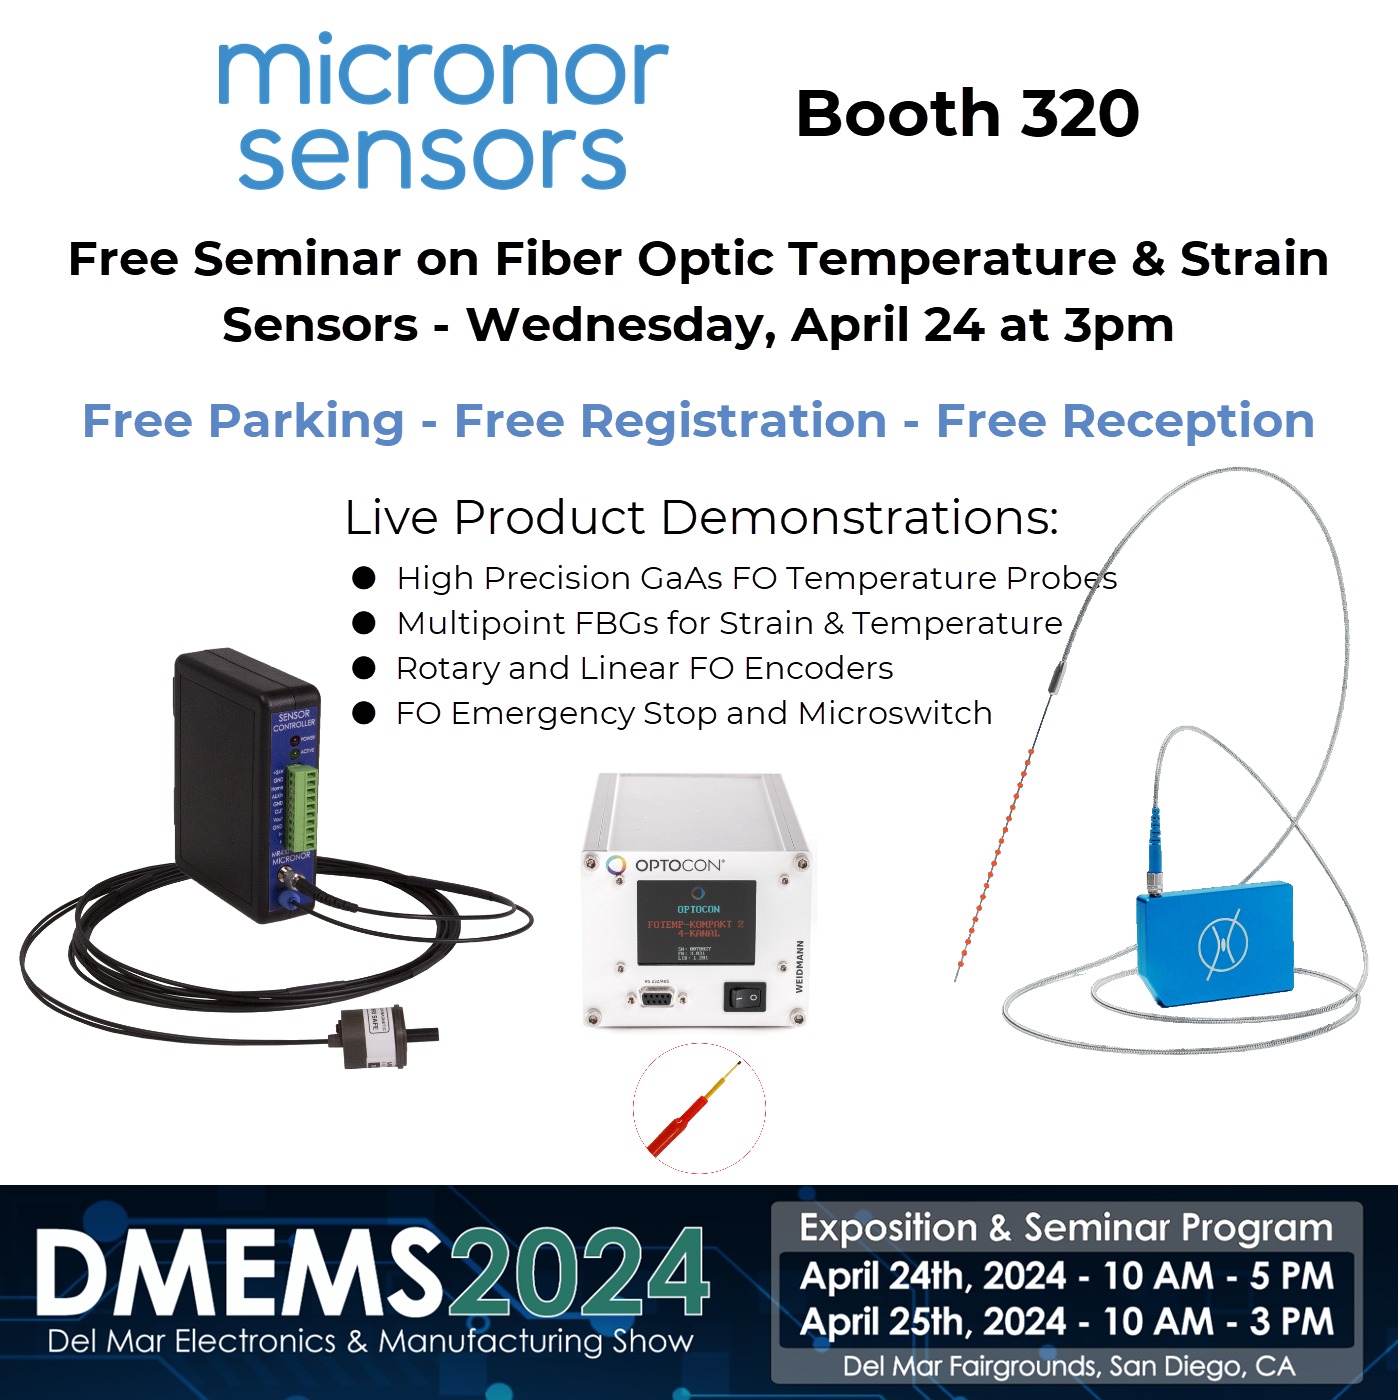 Fiber optic temperature and strain sensors featured at 2023 Anaheim Electronics and Manufacturing Show, Sept 27-28 2023, at Anaheim Convention Center